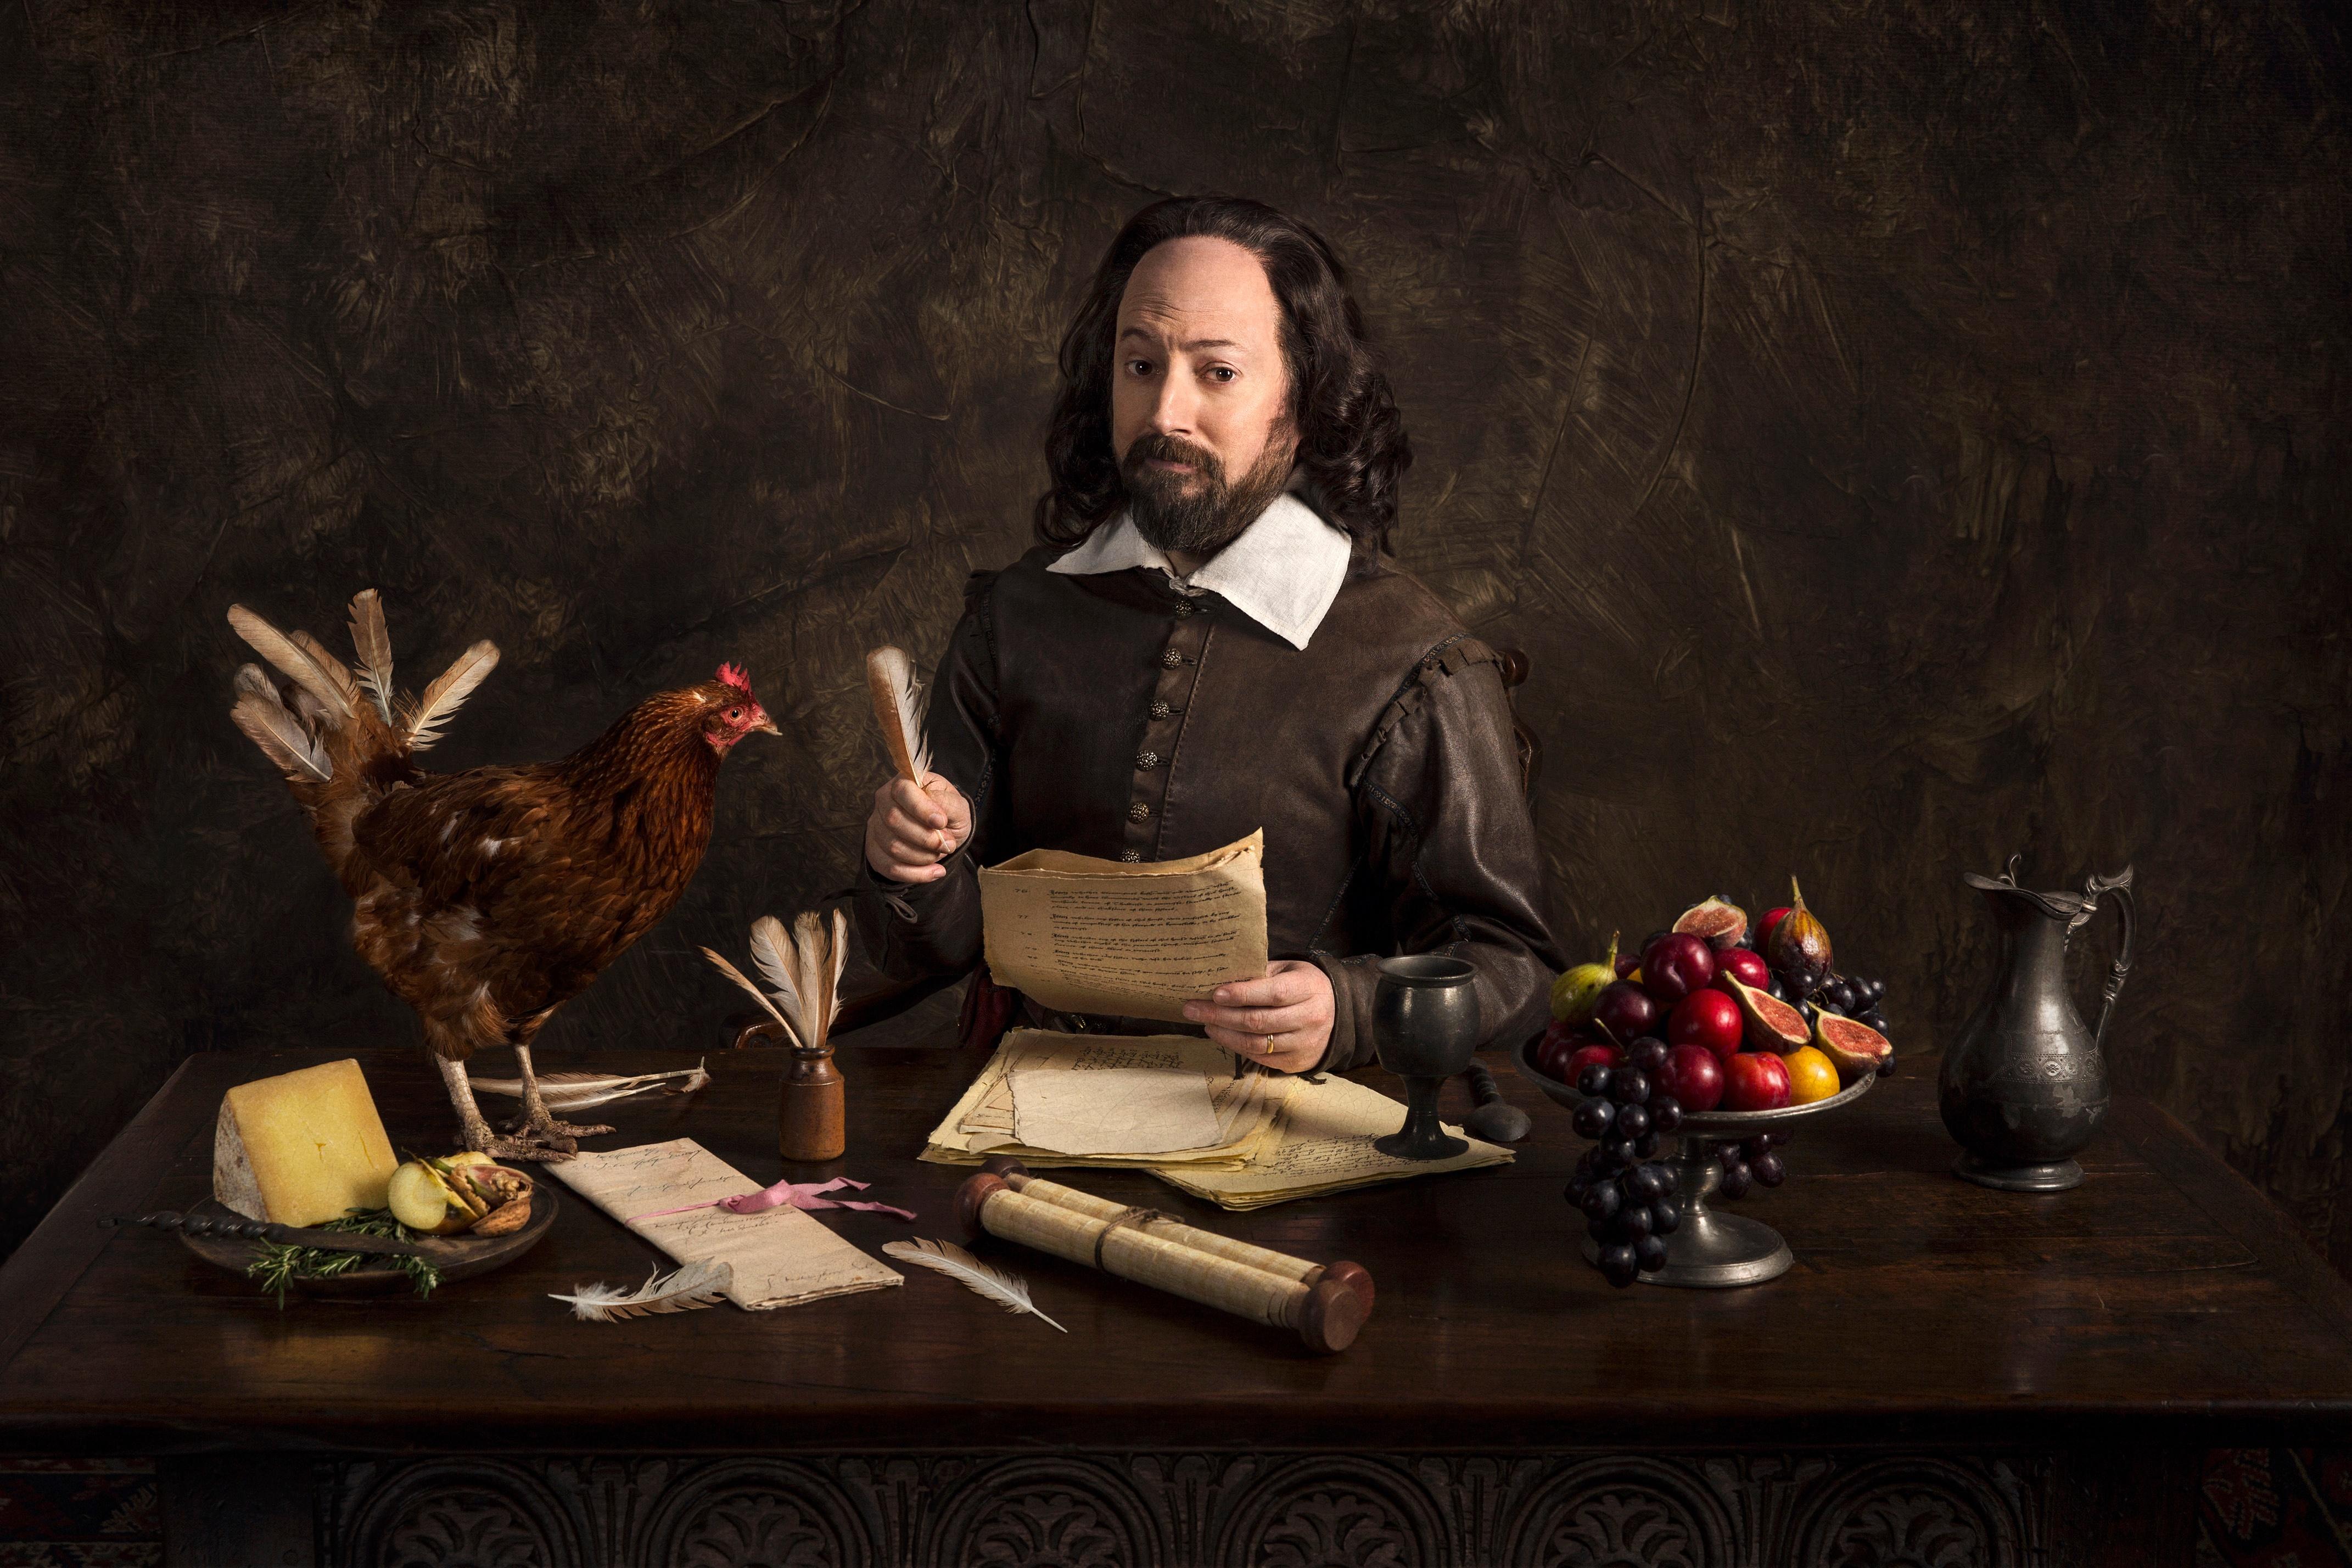 William Shakespeare at a writing desk covered in items, including a chicken